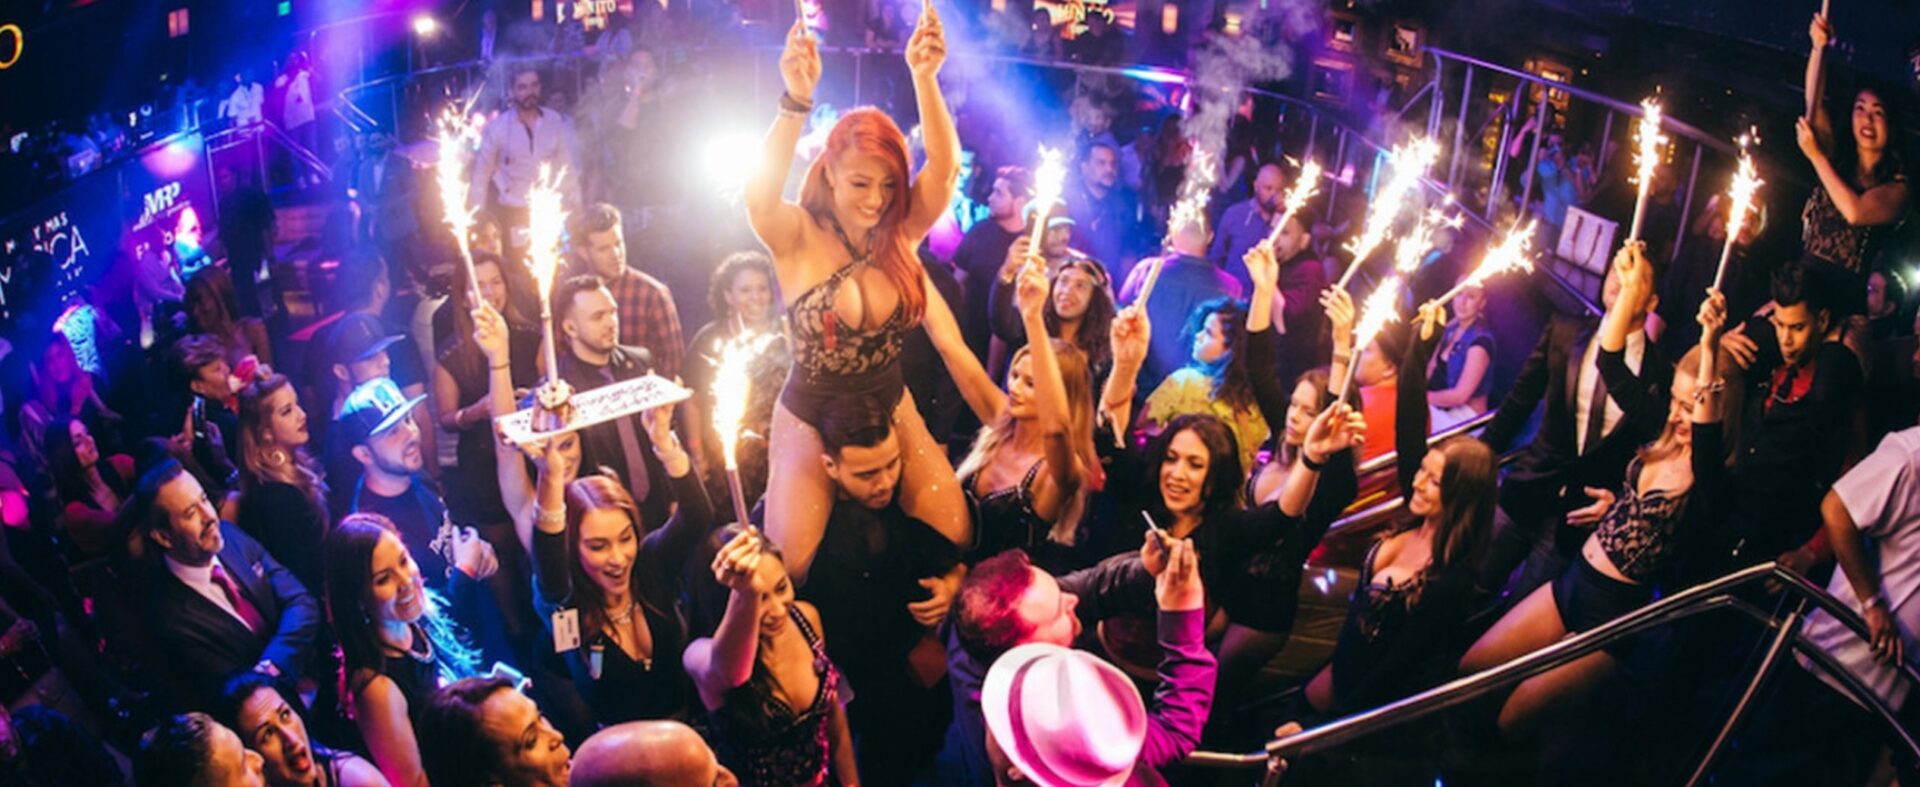 Night Clubs in Miami - Bottle Service and VIP Tables